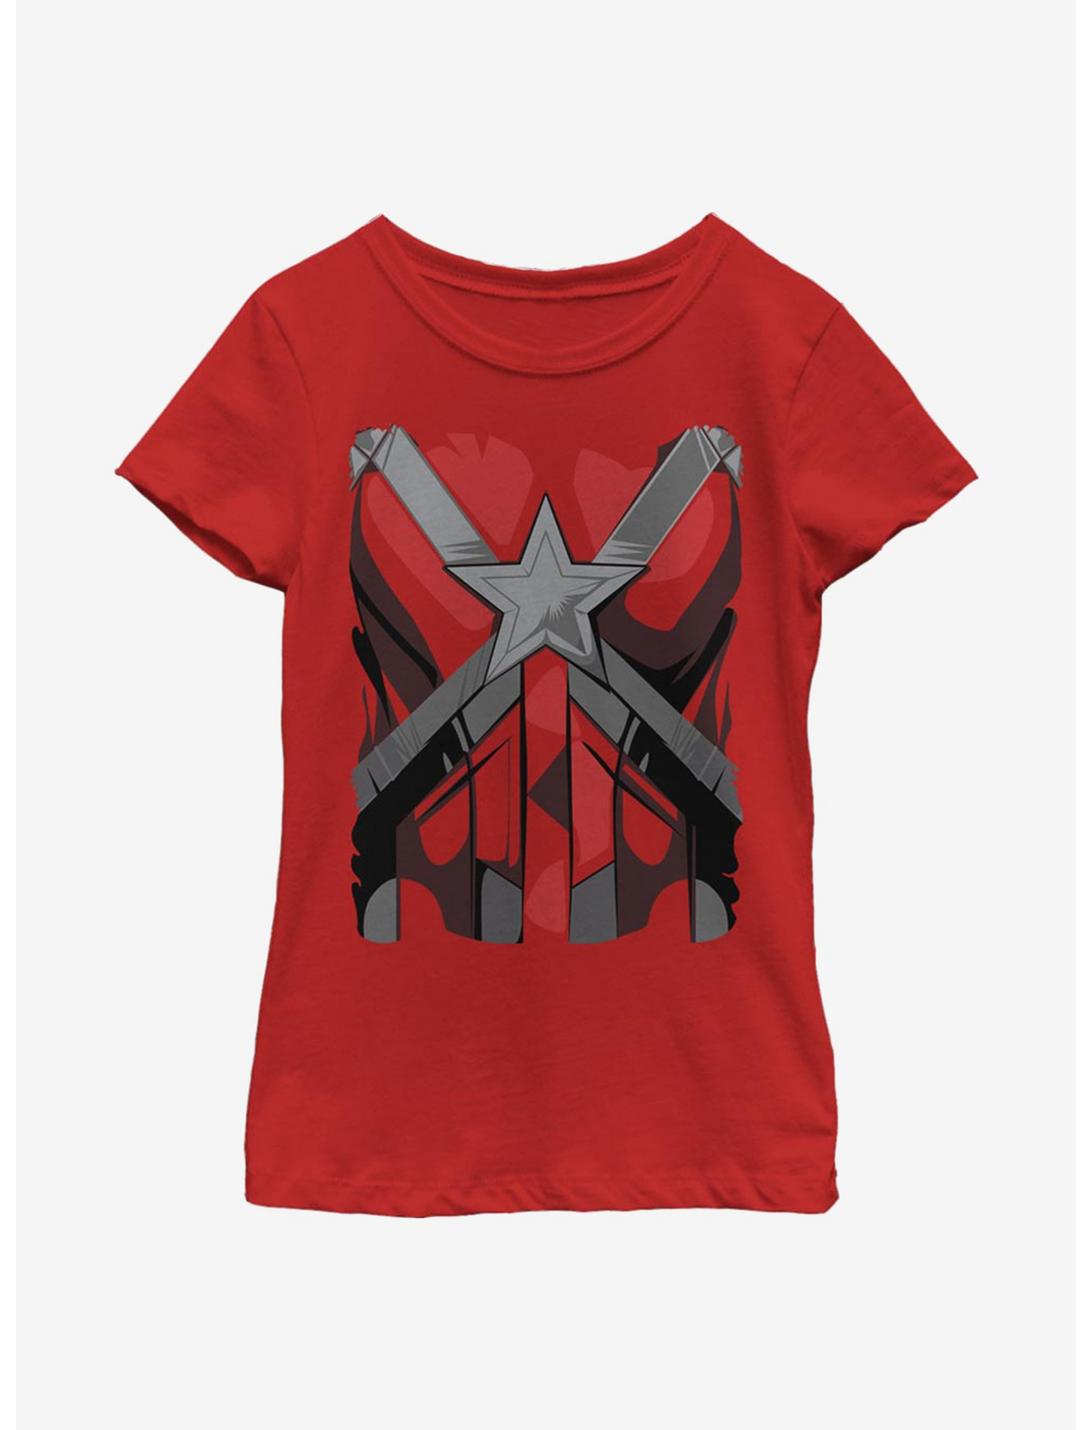 Marvel Black Widow Red Guardian Costume Youth Girls T-Shirt, RED, hi-res